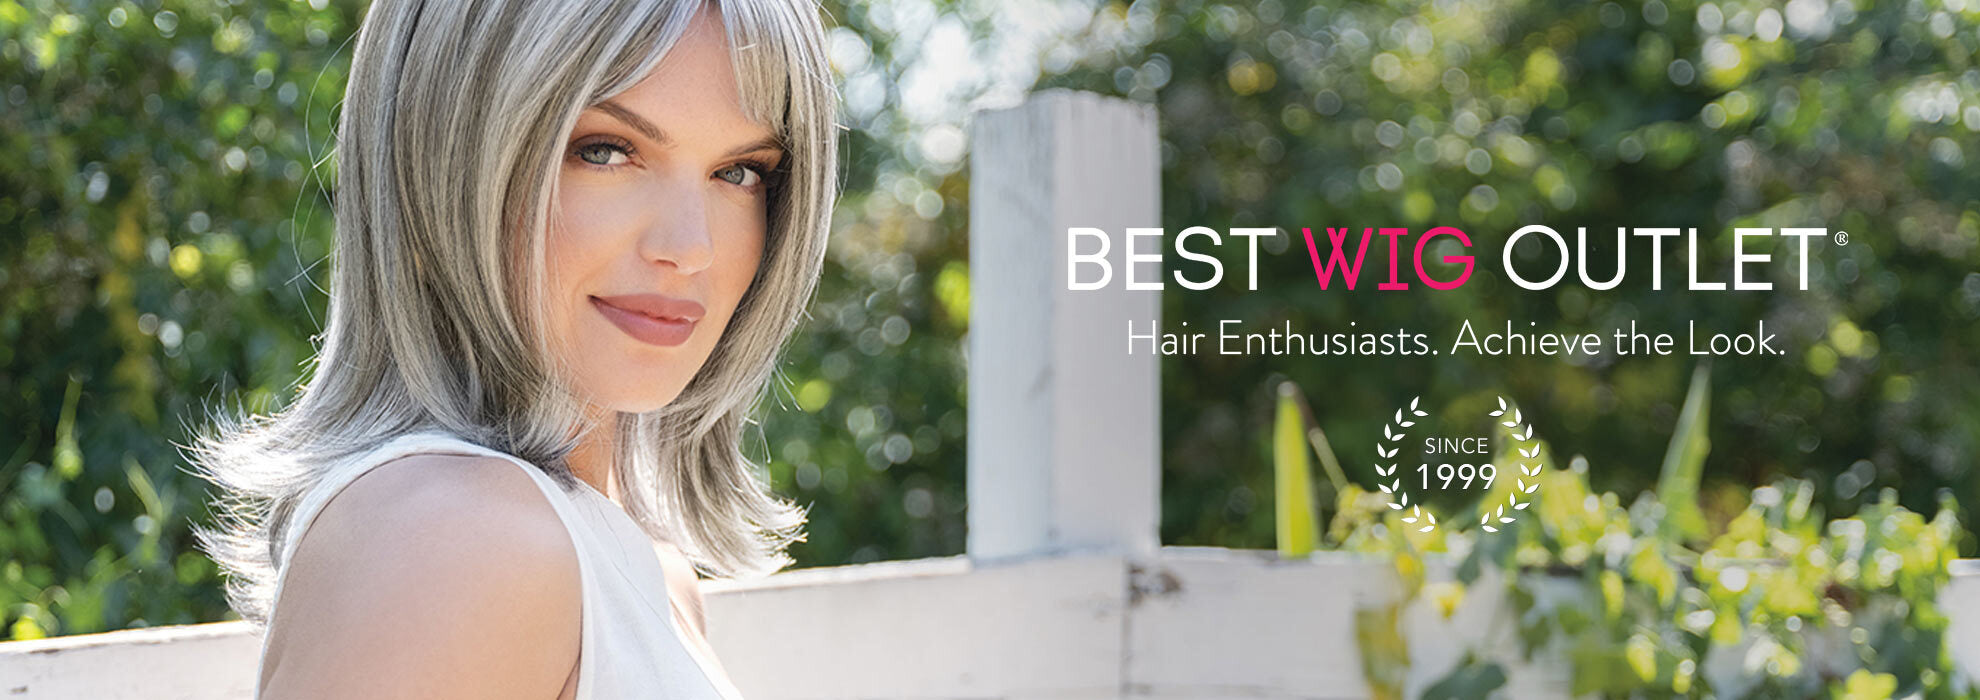 About Best Wig Outlet